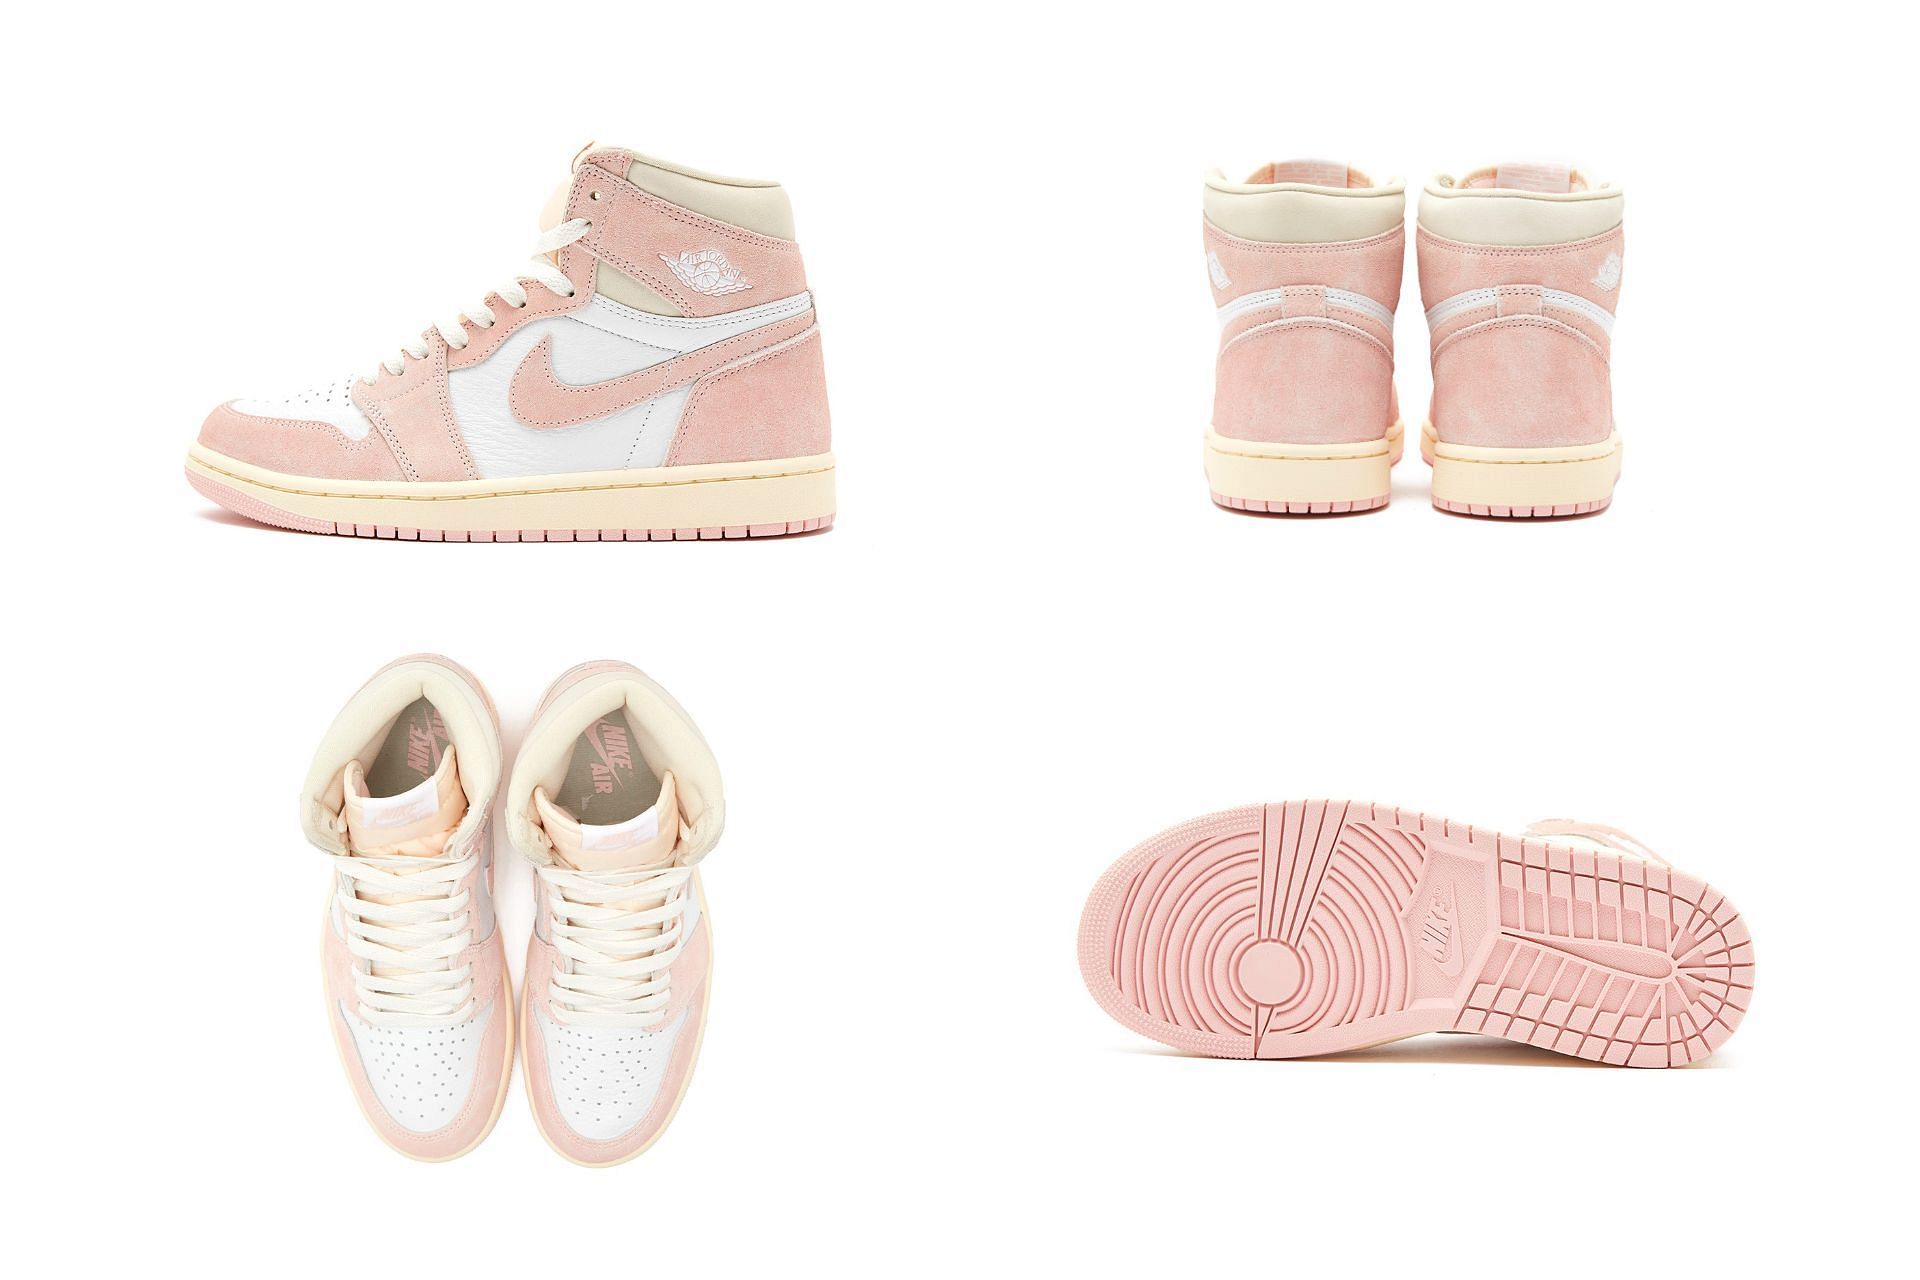 The upcoming Nike Air Jordan 1 High OG &quot;Washed Pink&quot; sneaker colorway will be released exclusively in women&#039;s sizes (Image via Sportskeeda)